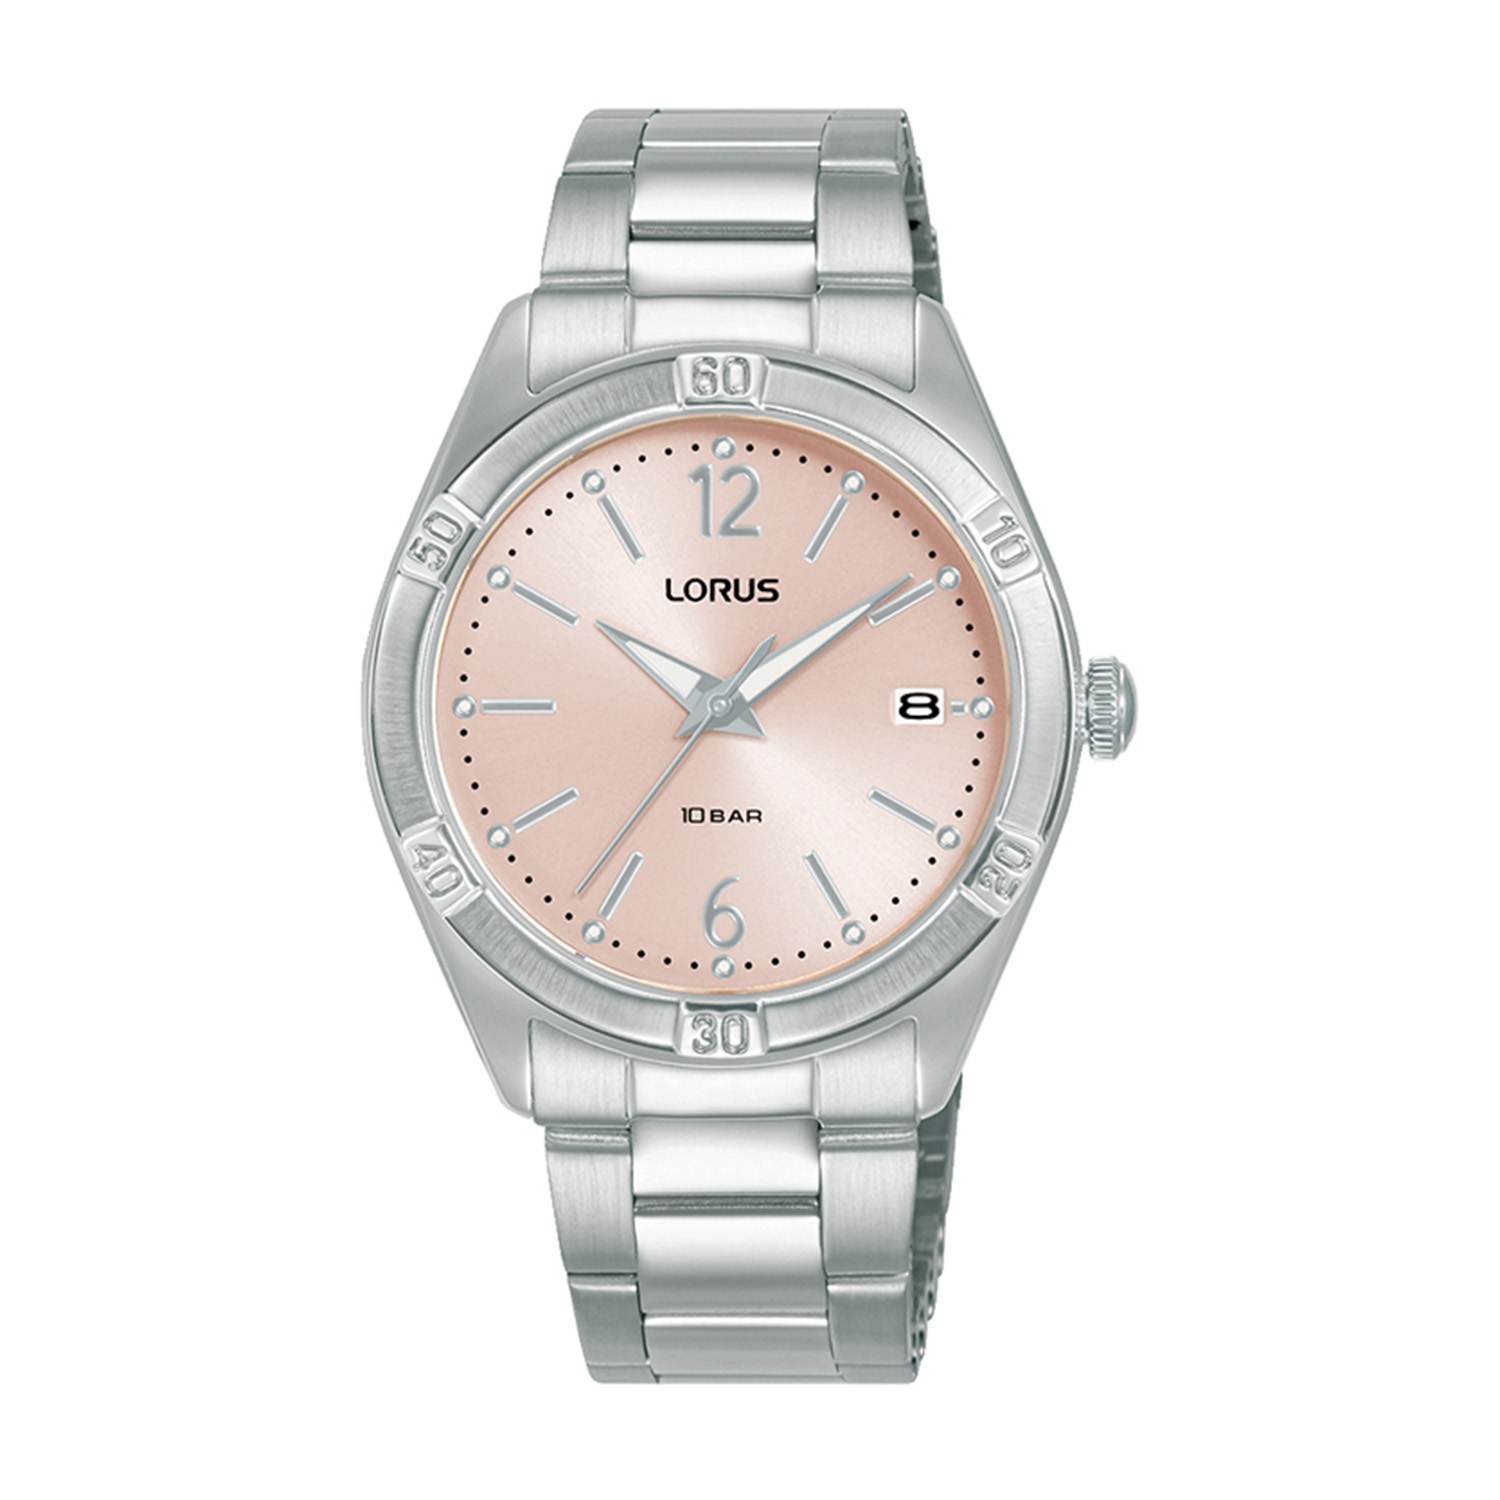 Womens watch LORUS made of silver stainless steel with pink dial and bracelet.